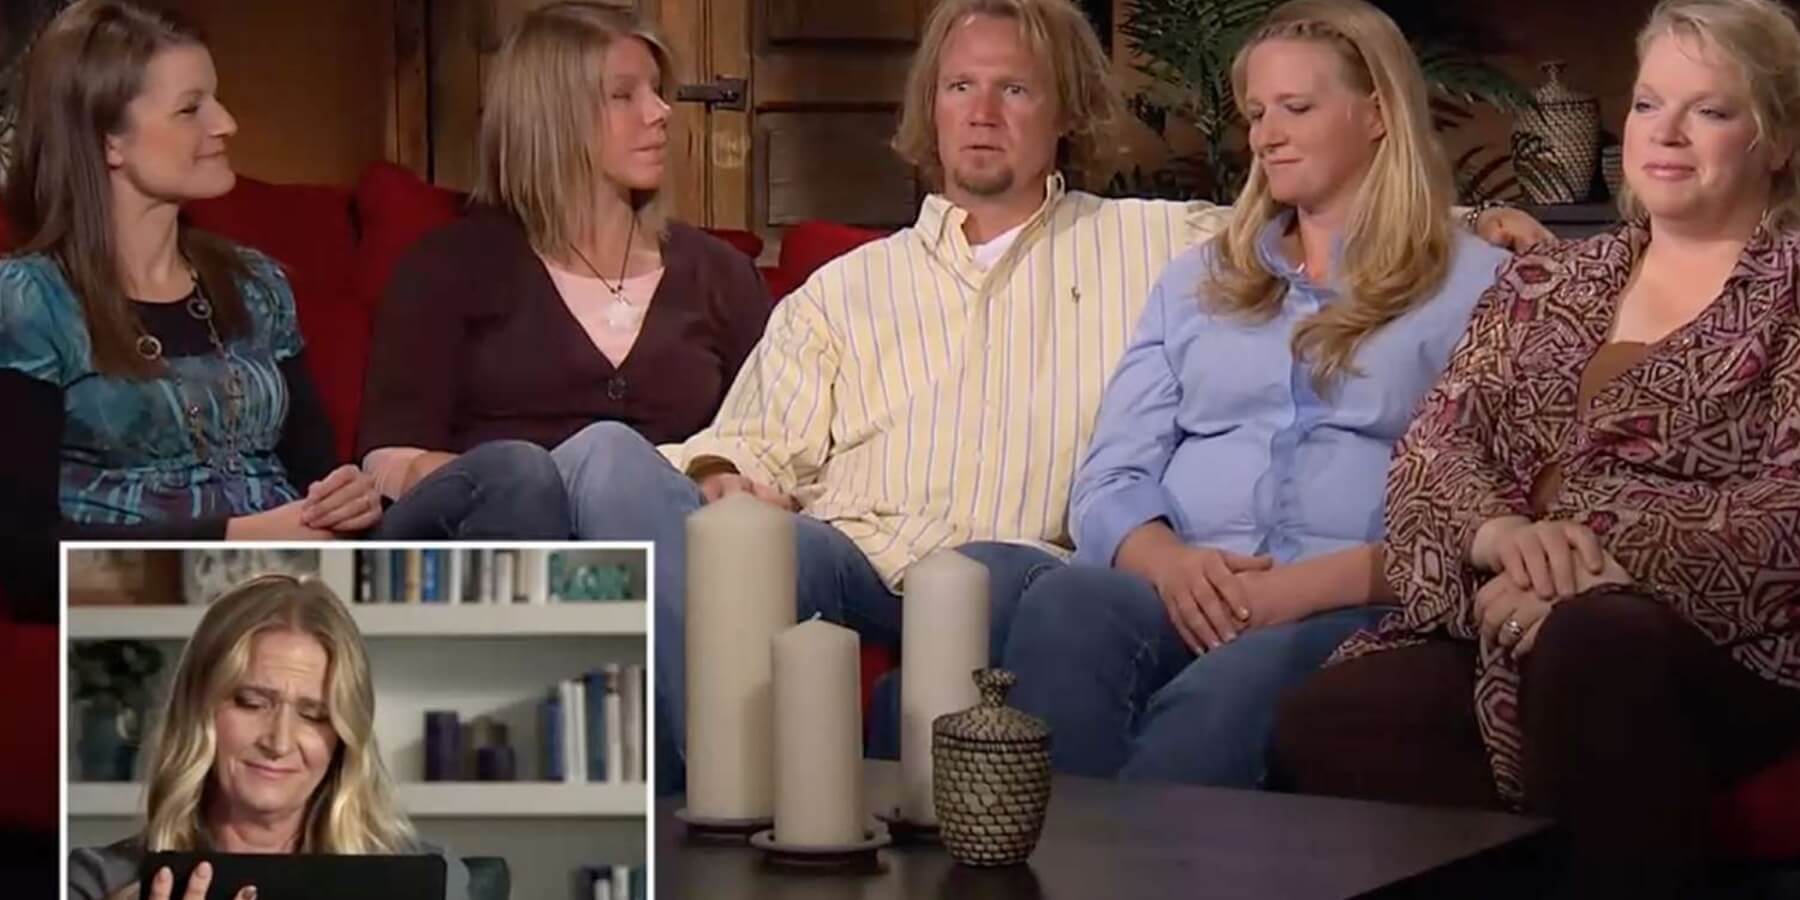 The cast of TLC's 'Sister Wives' during Season 1